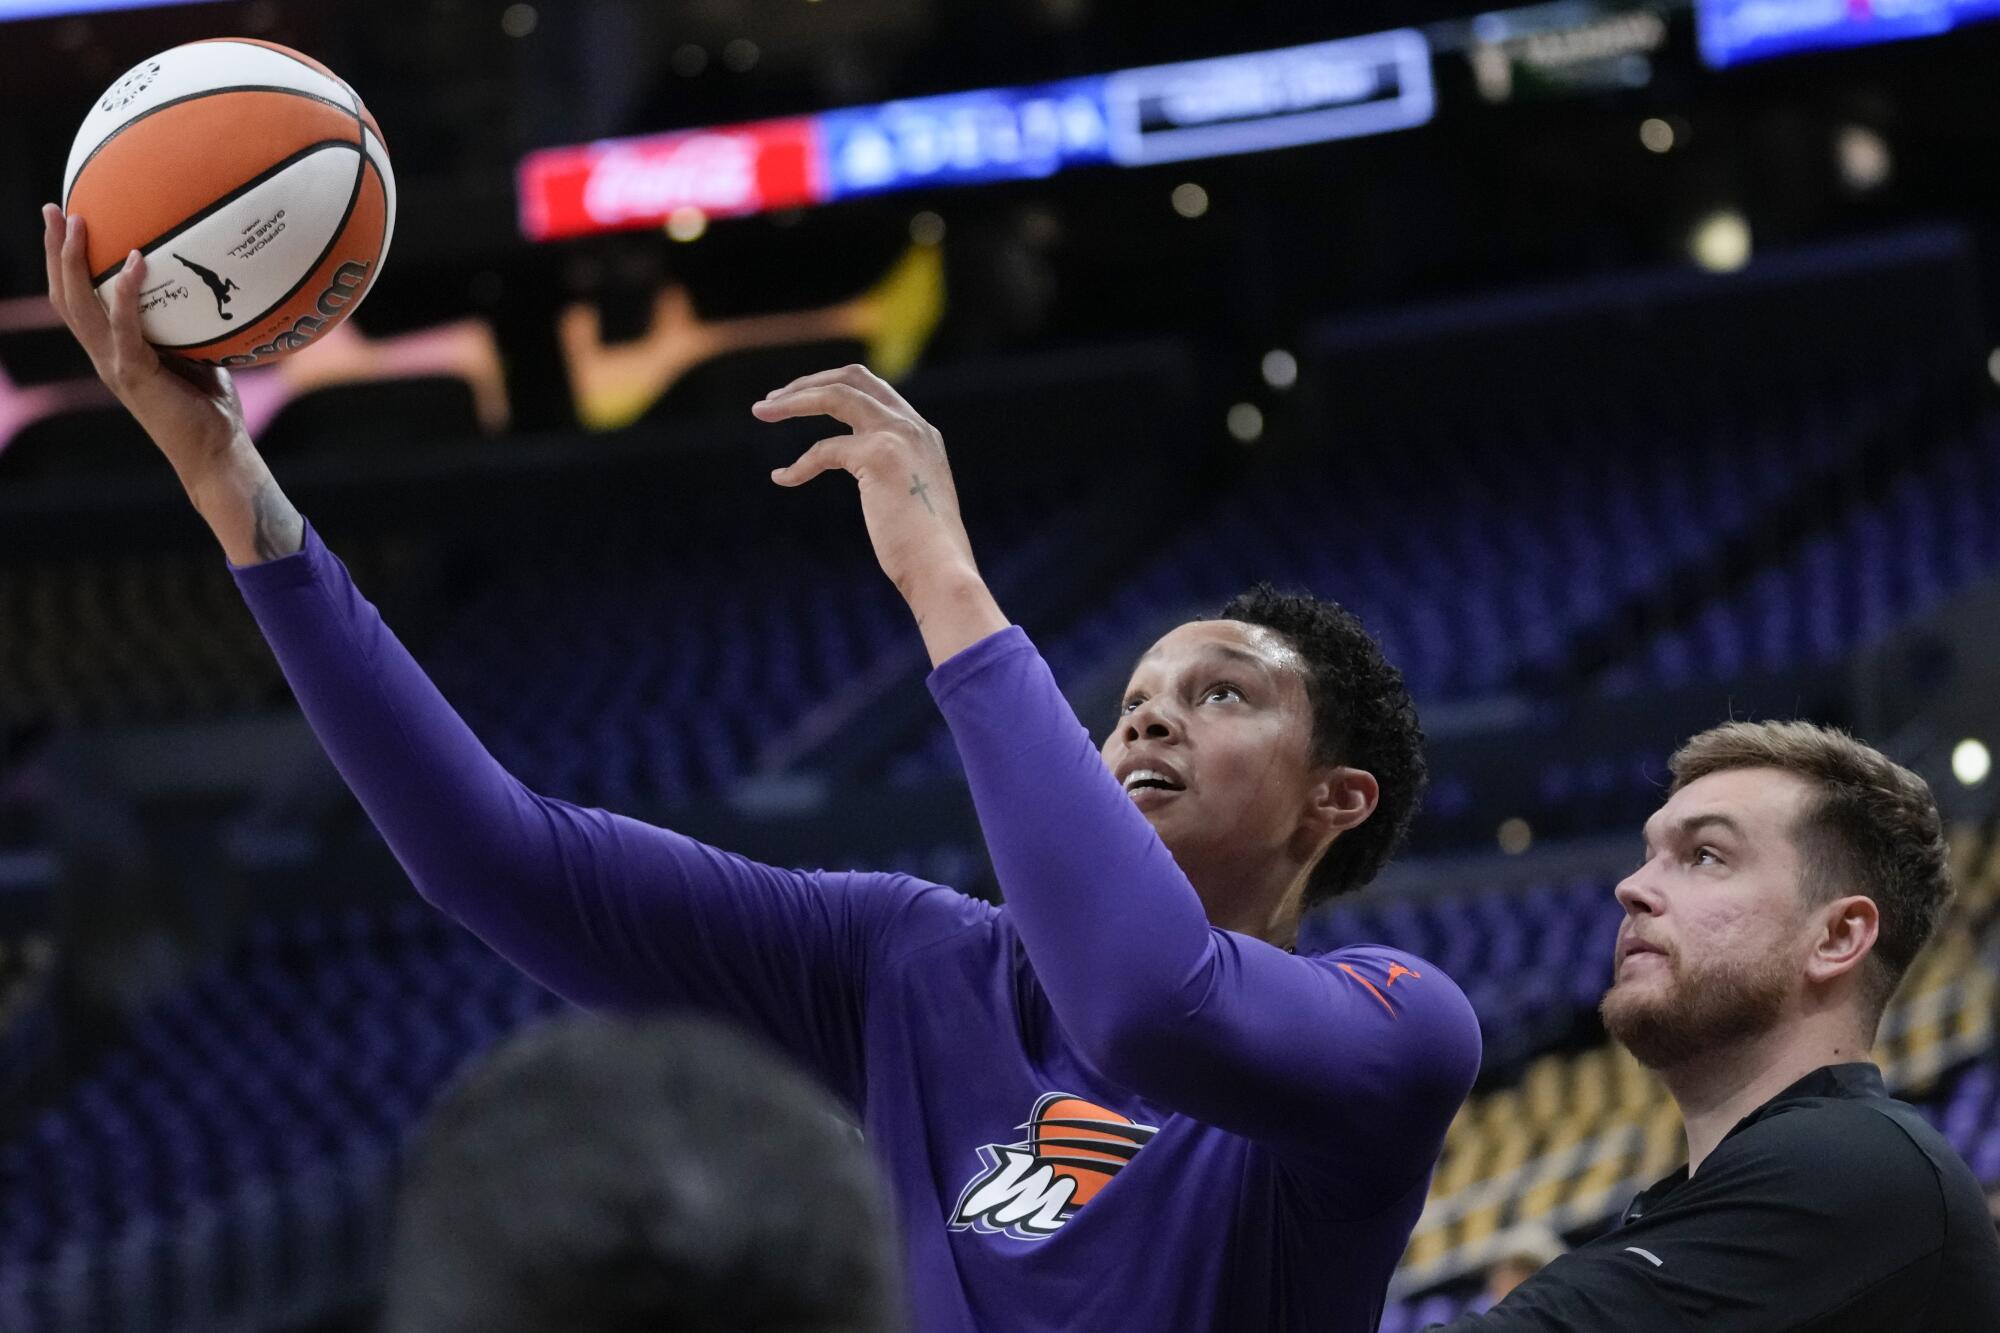 Phoenix Mercury center Brittney Griner shoots a ball under pressure from a staff member as she warms up.